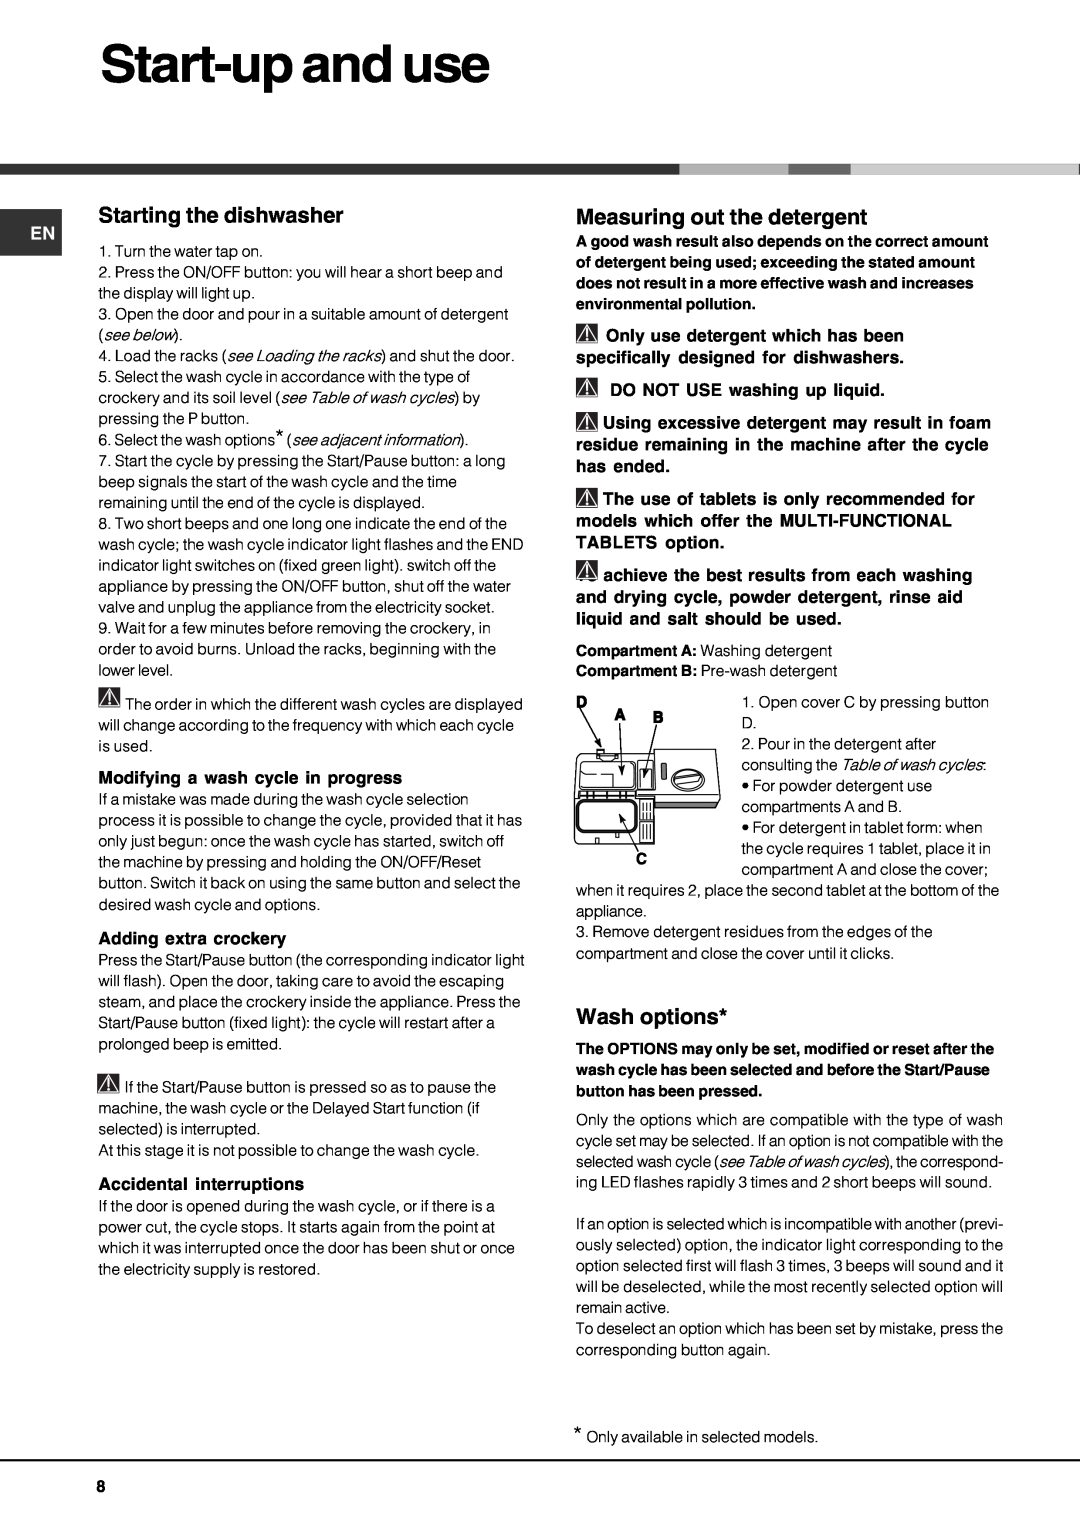 Hotpoint FDF-780 manual Start-upand use, Starting the dishwasher, Measuring out the detergent, Wash options 